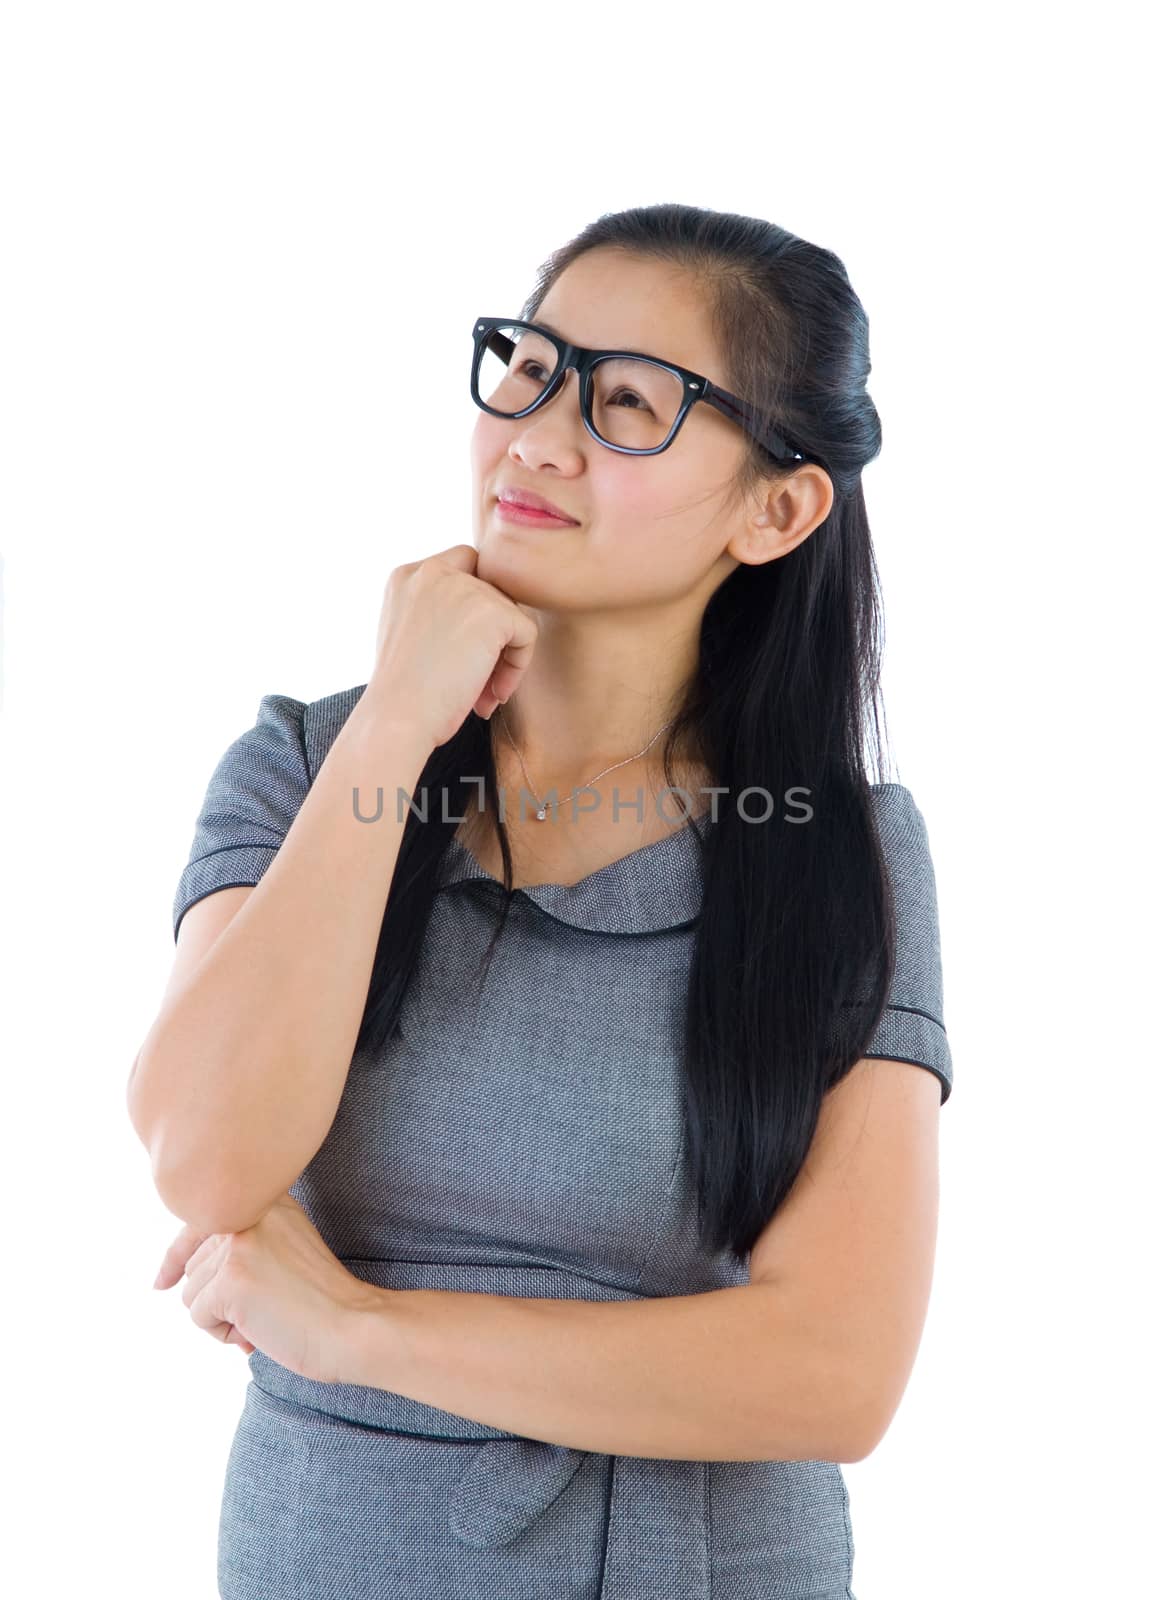 Businesswoman having a thought, looking up smiling happy. Portrait of beautiful Asian female model standing isolated on white background.